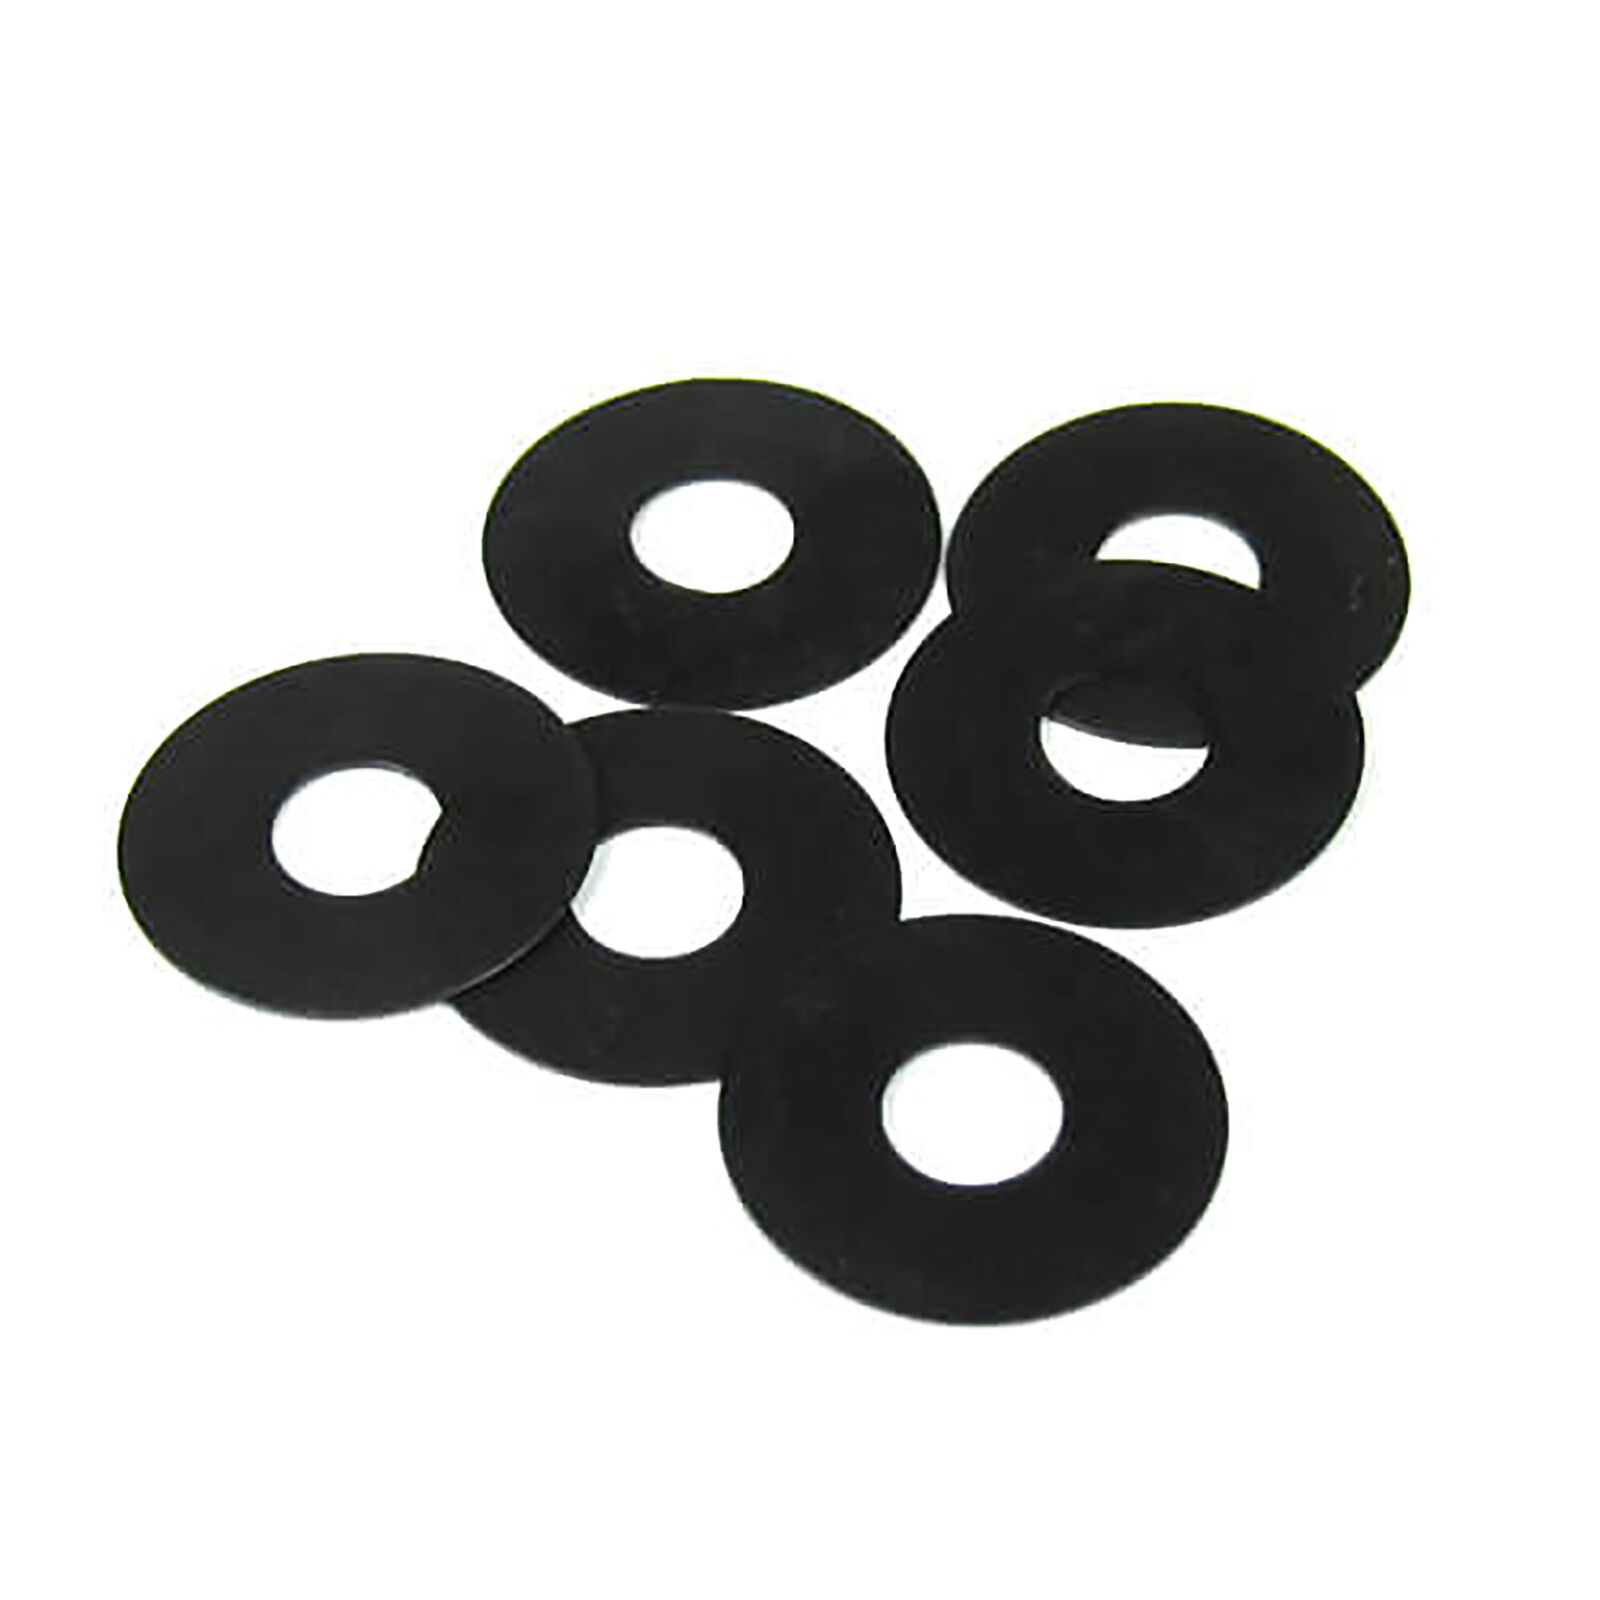 Differential Shims 6x17x.3mm (6)